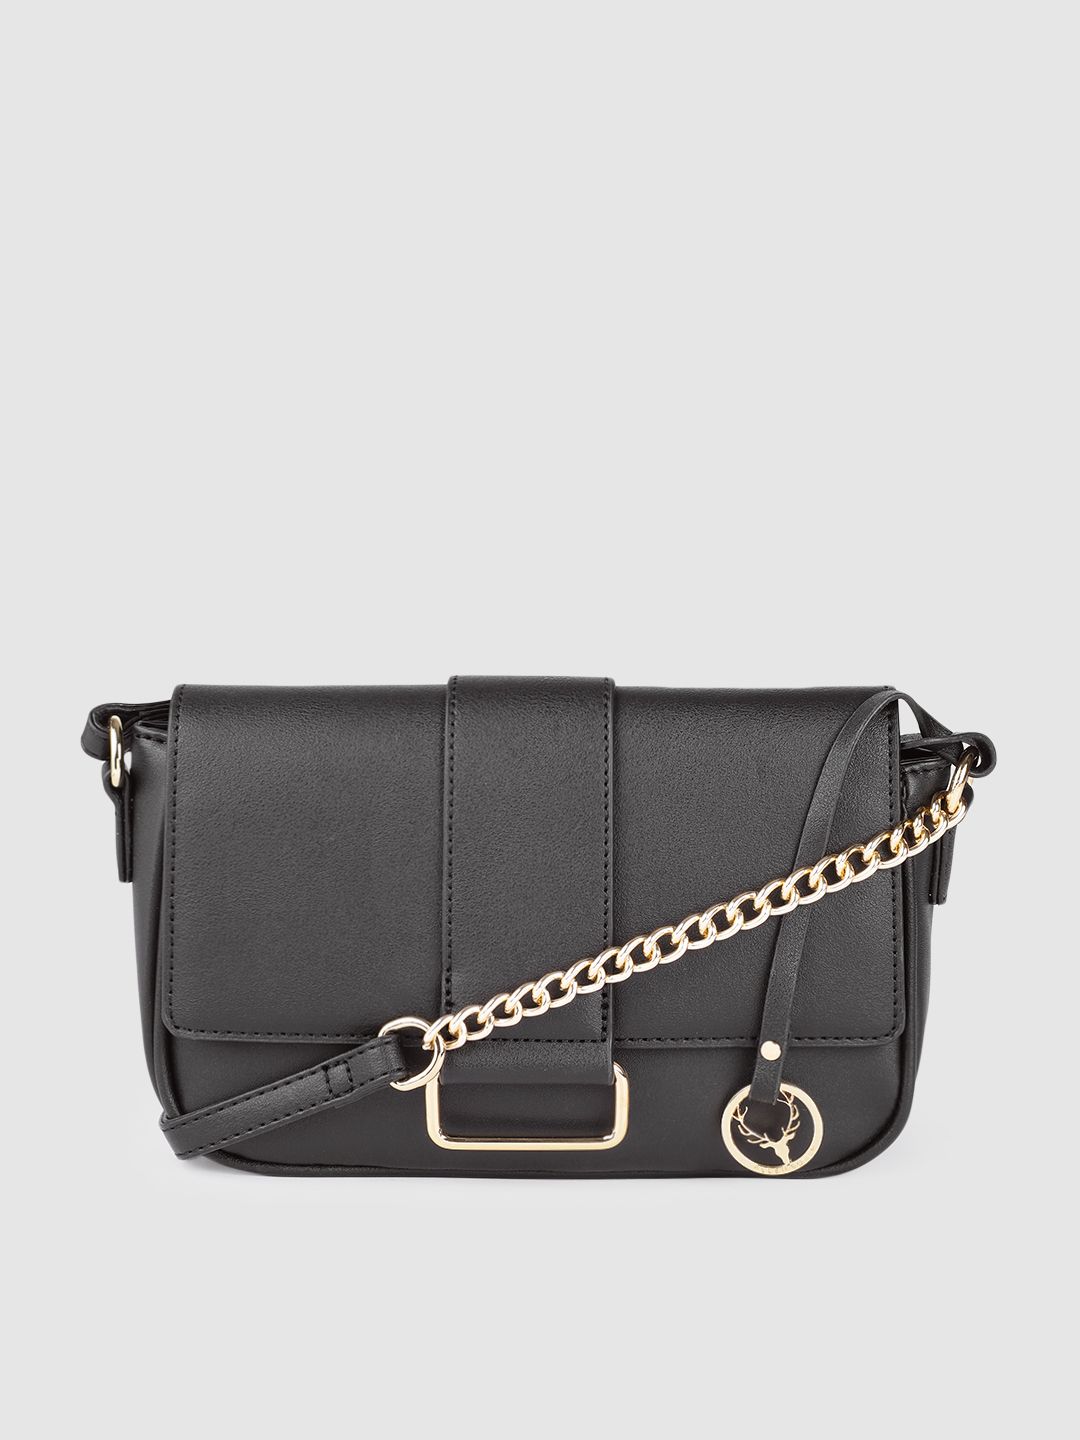 Allen Solly Black PU Structured Sling Bag Price in India